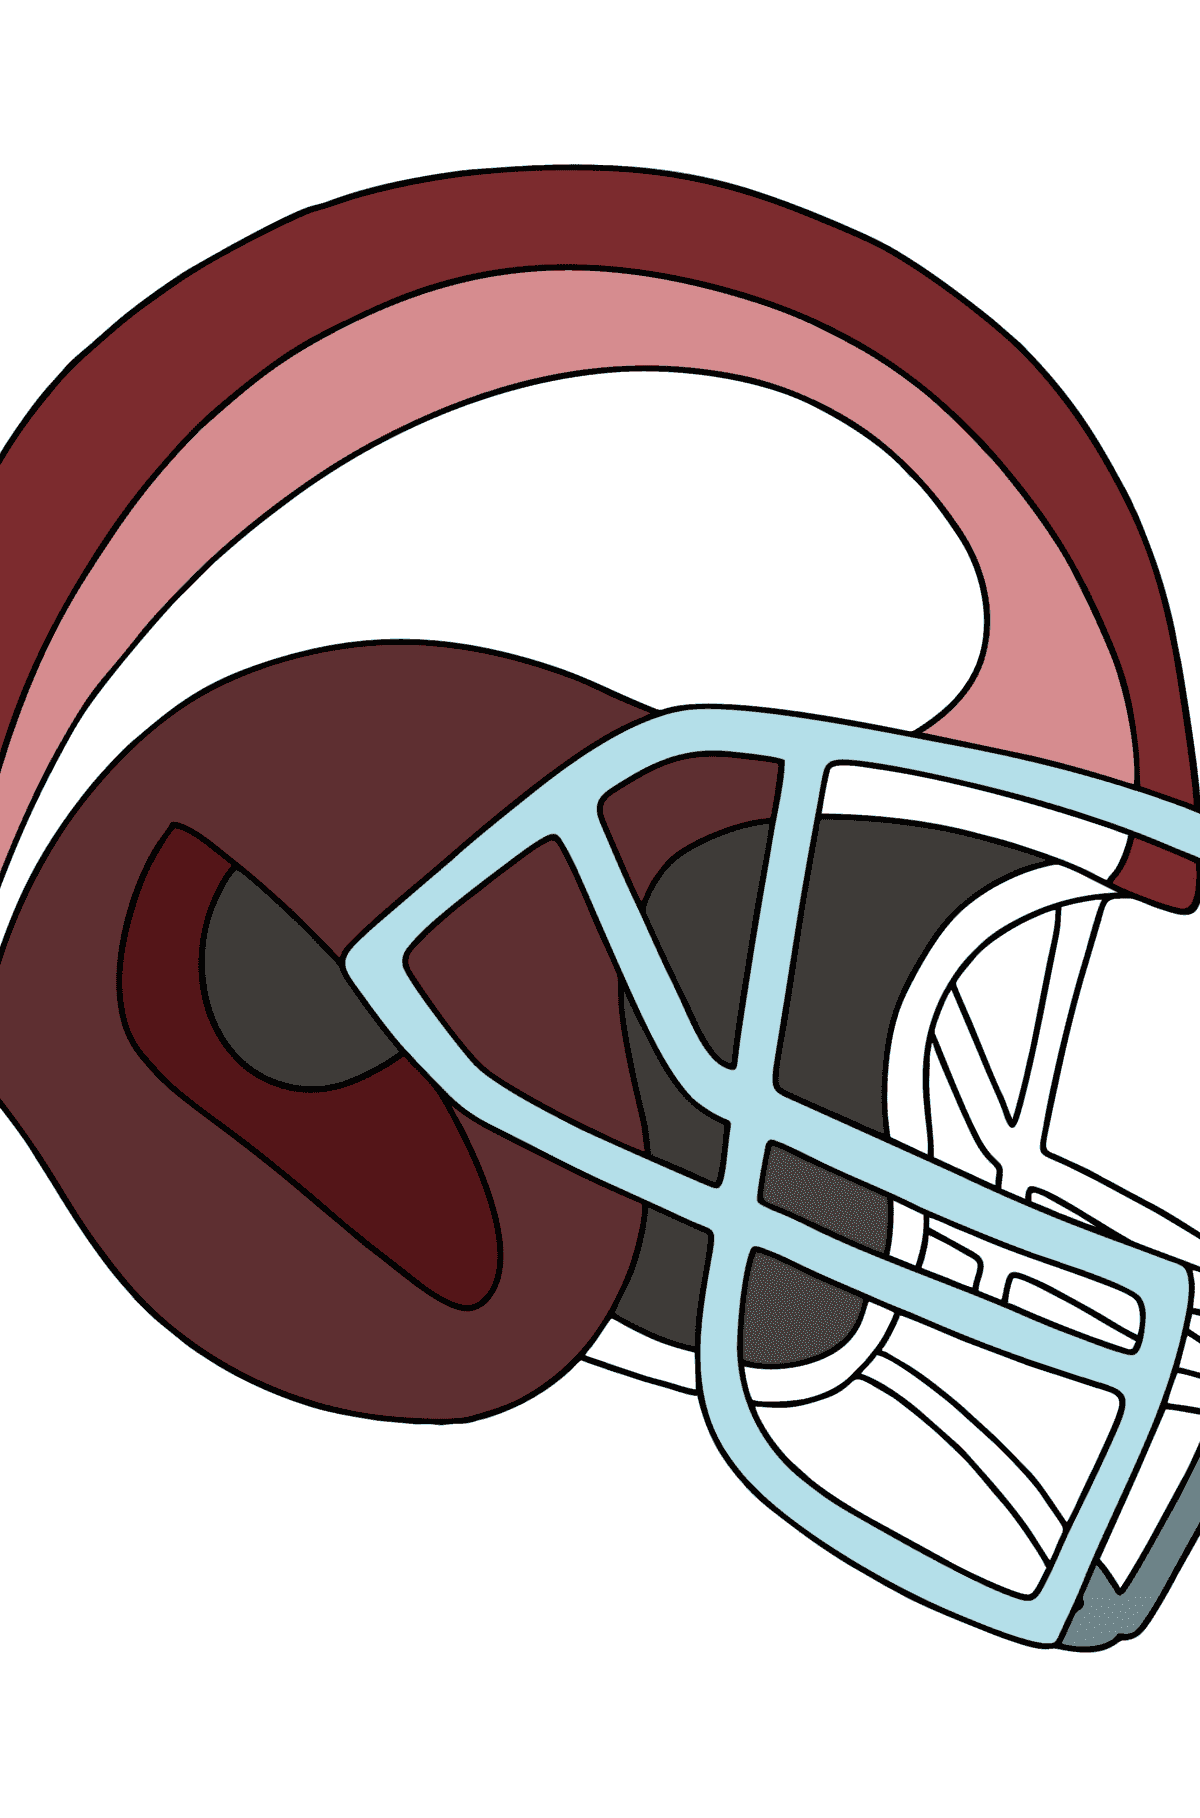 NFL Safety Helmet сolouring page - Coloring Pages for Kids